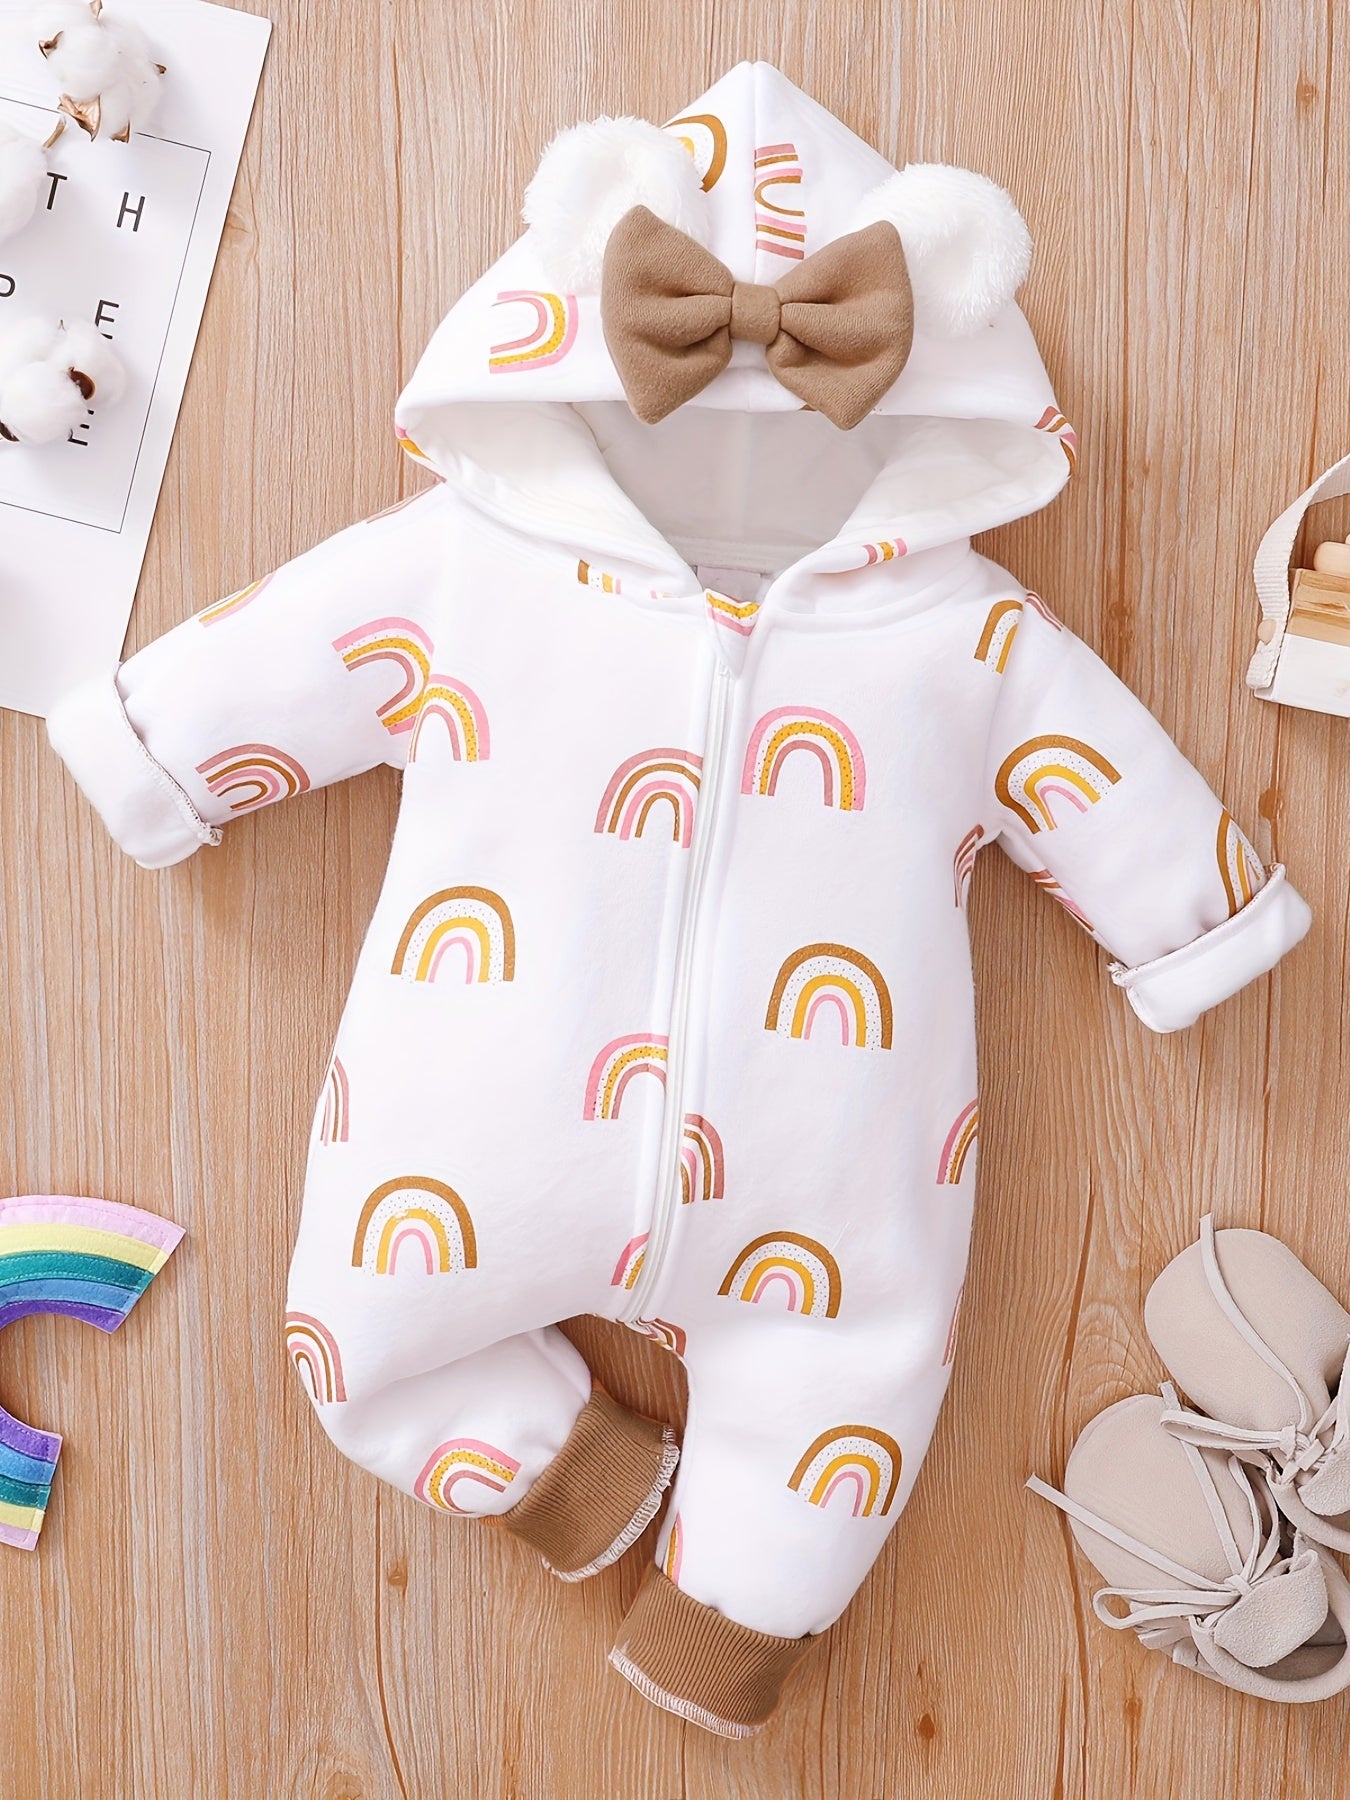 Adorable Heart-Patterned Baby Jumpsuit - Perfect for Winter Warmth!